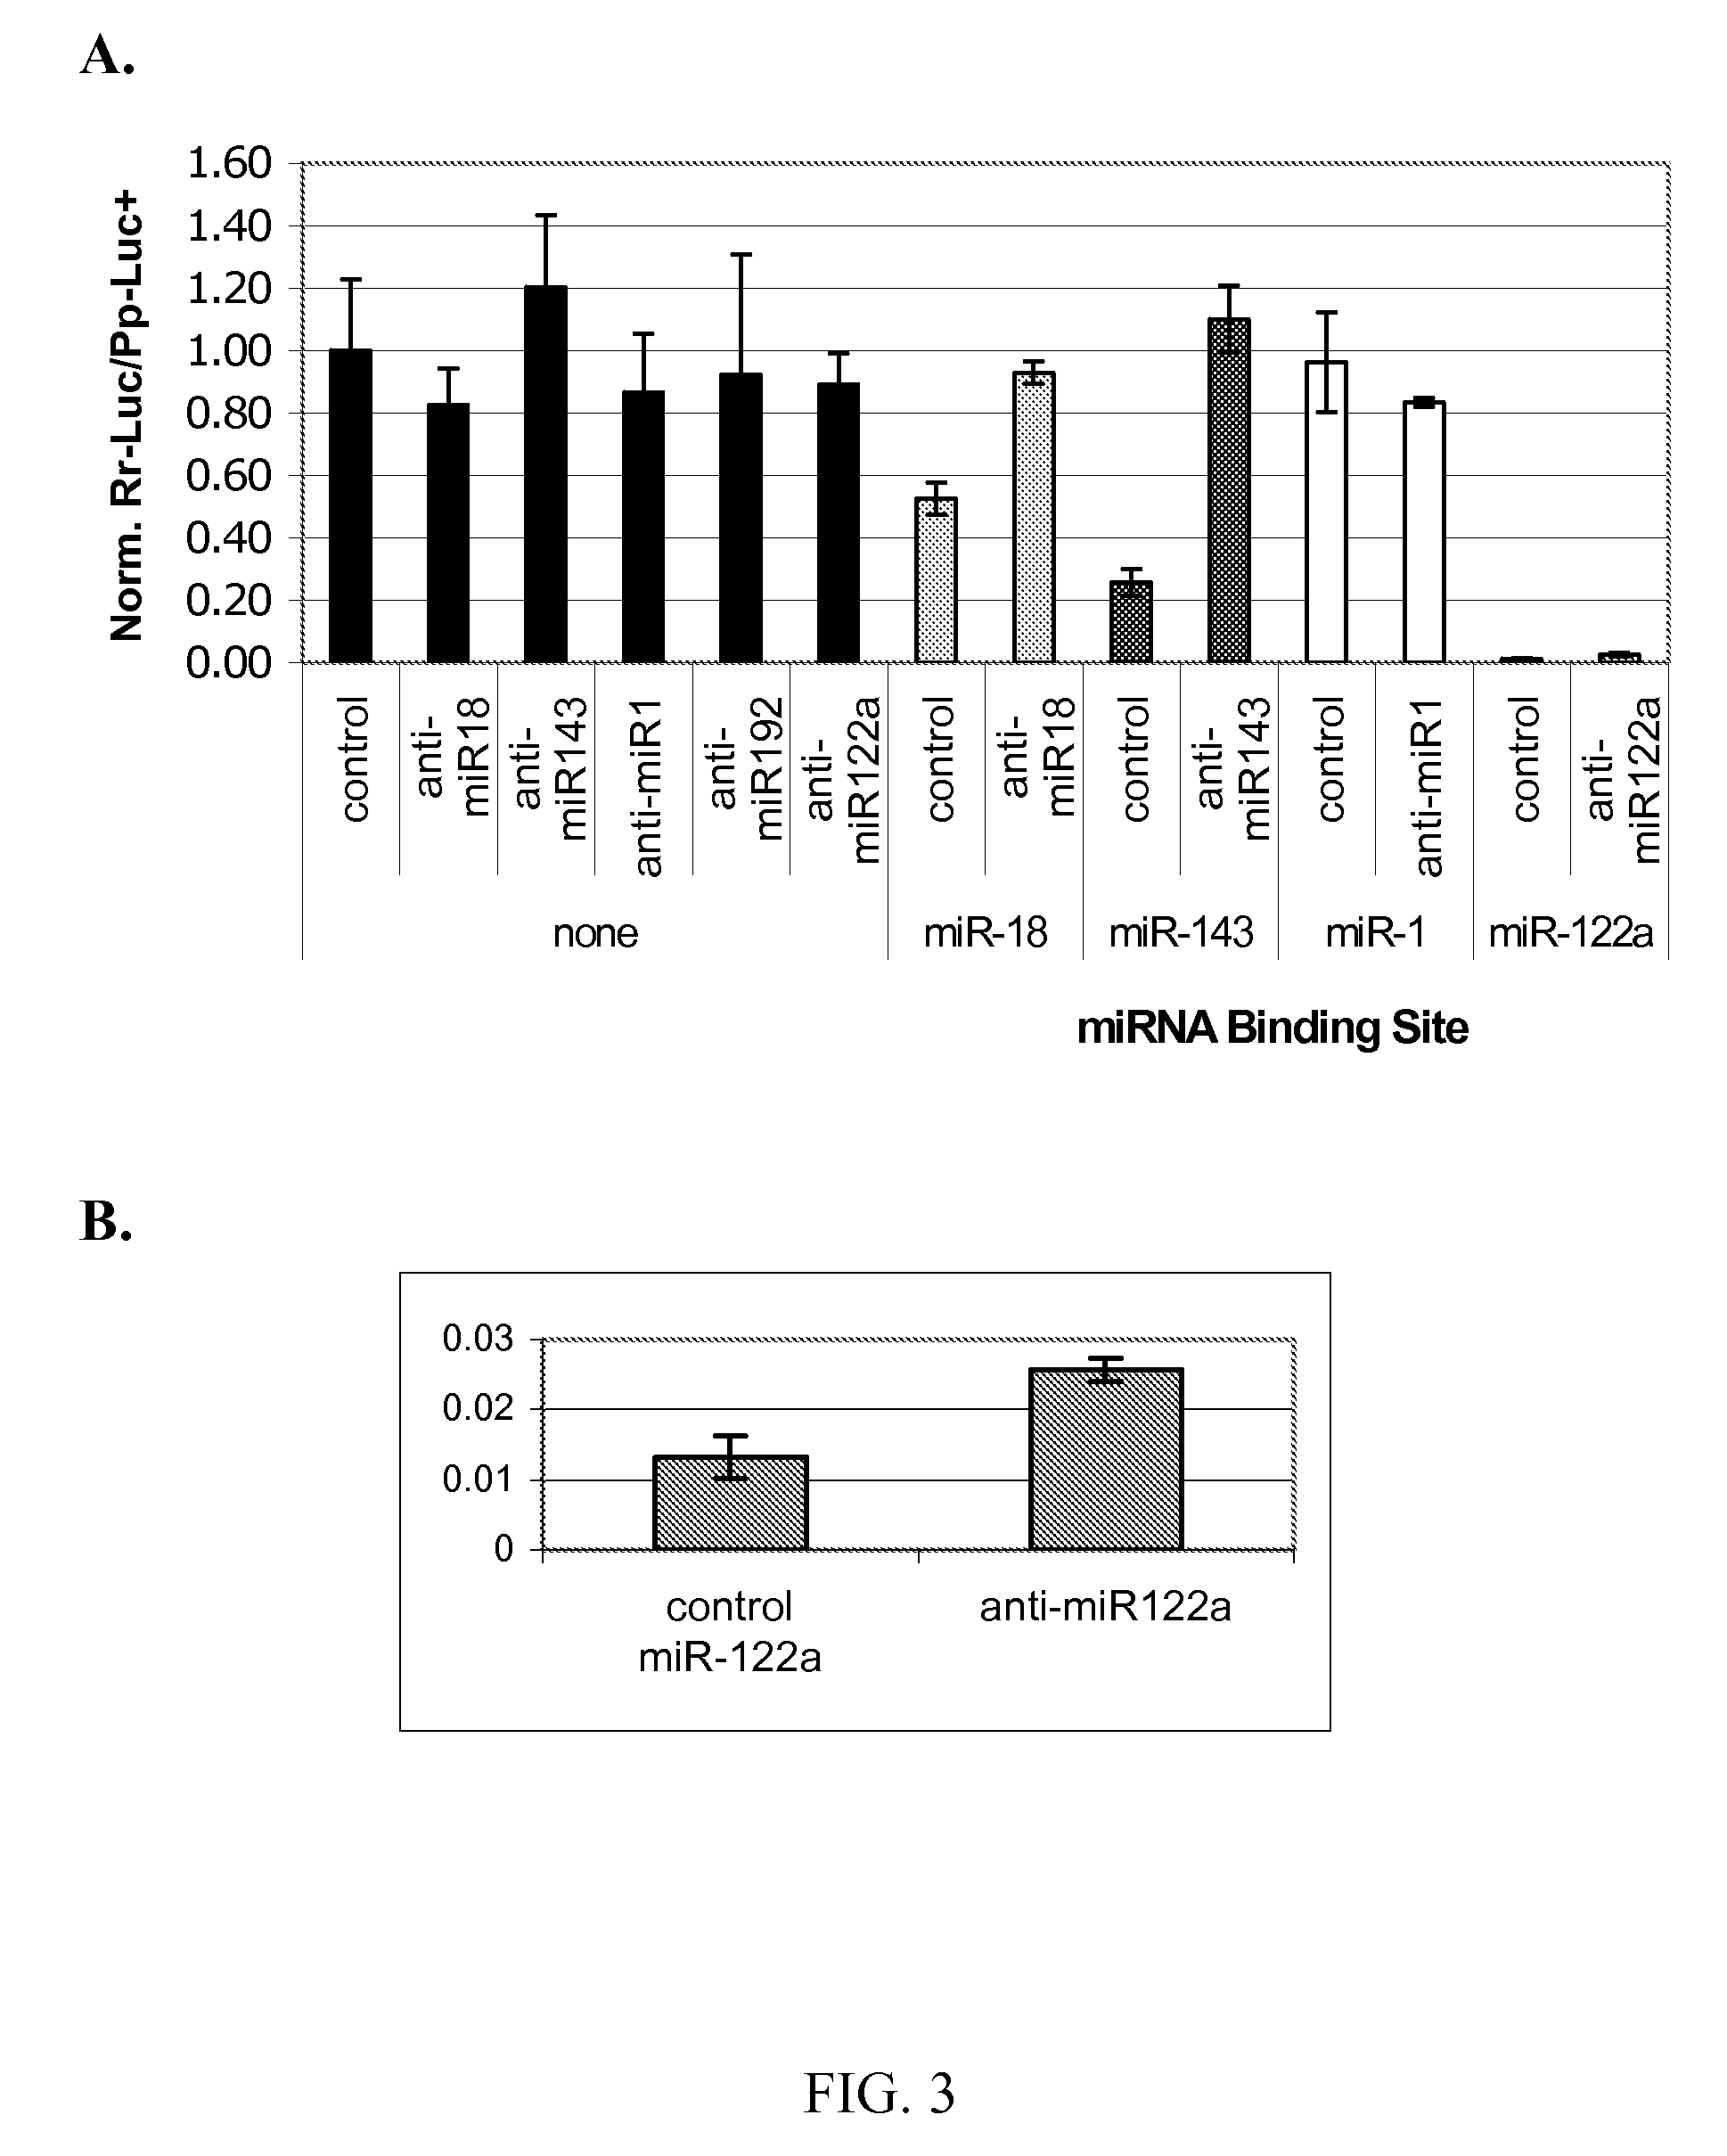 Regulatable or conditional expression systems